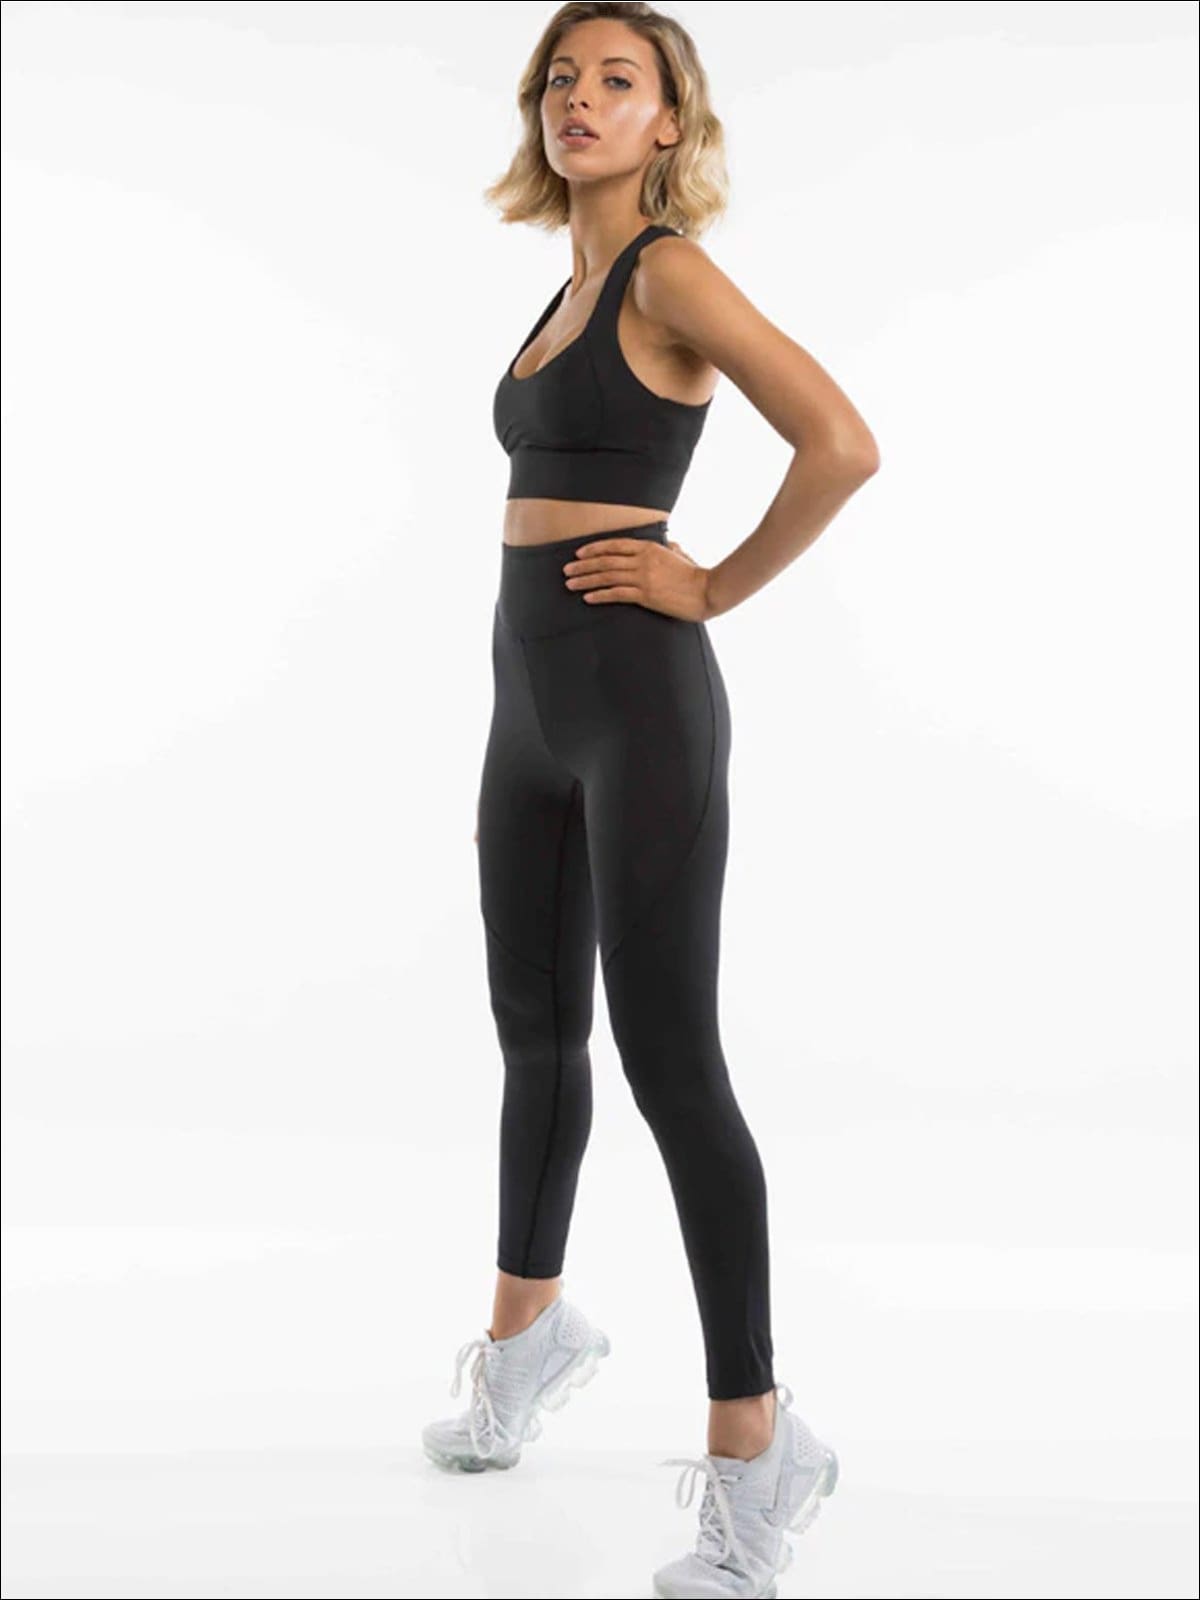 Cut It Out — Statement Activewear Sets With Cutouts & Curb Appeal